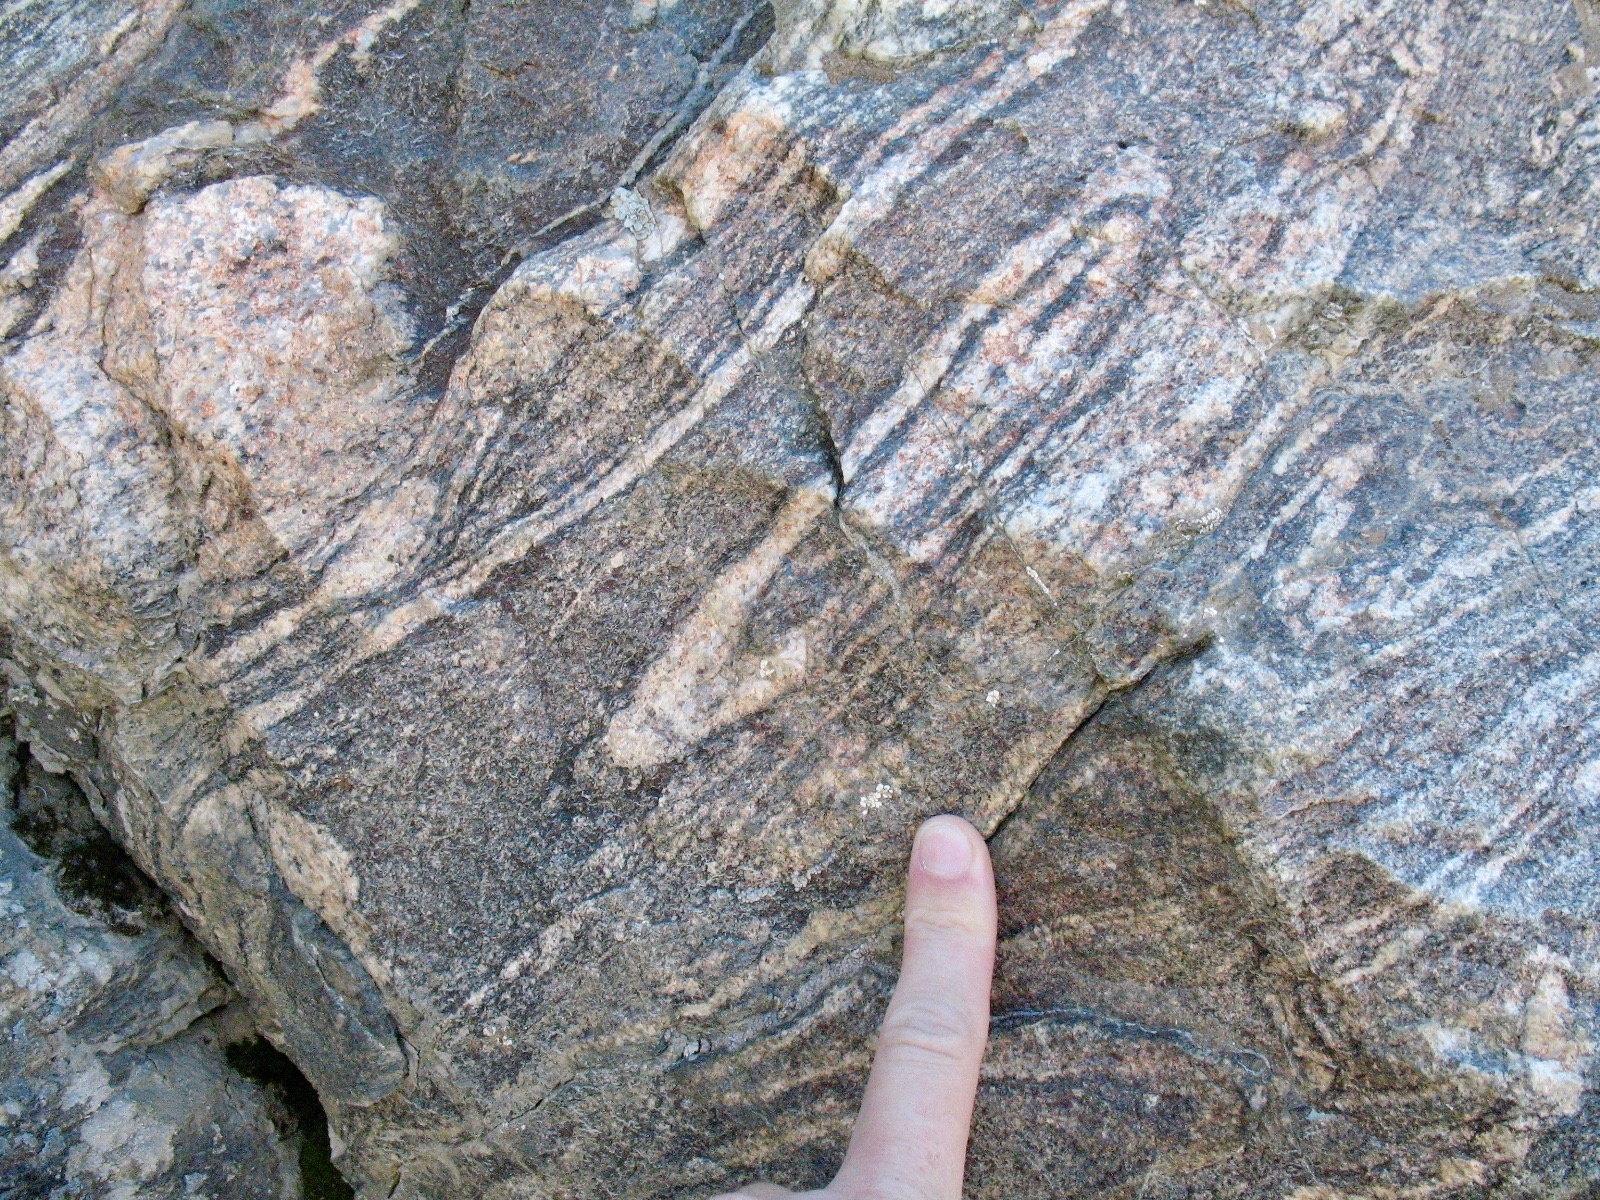 Rock that has distinct black and white swirling bands; a person's finger points to the rock for scale.